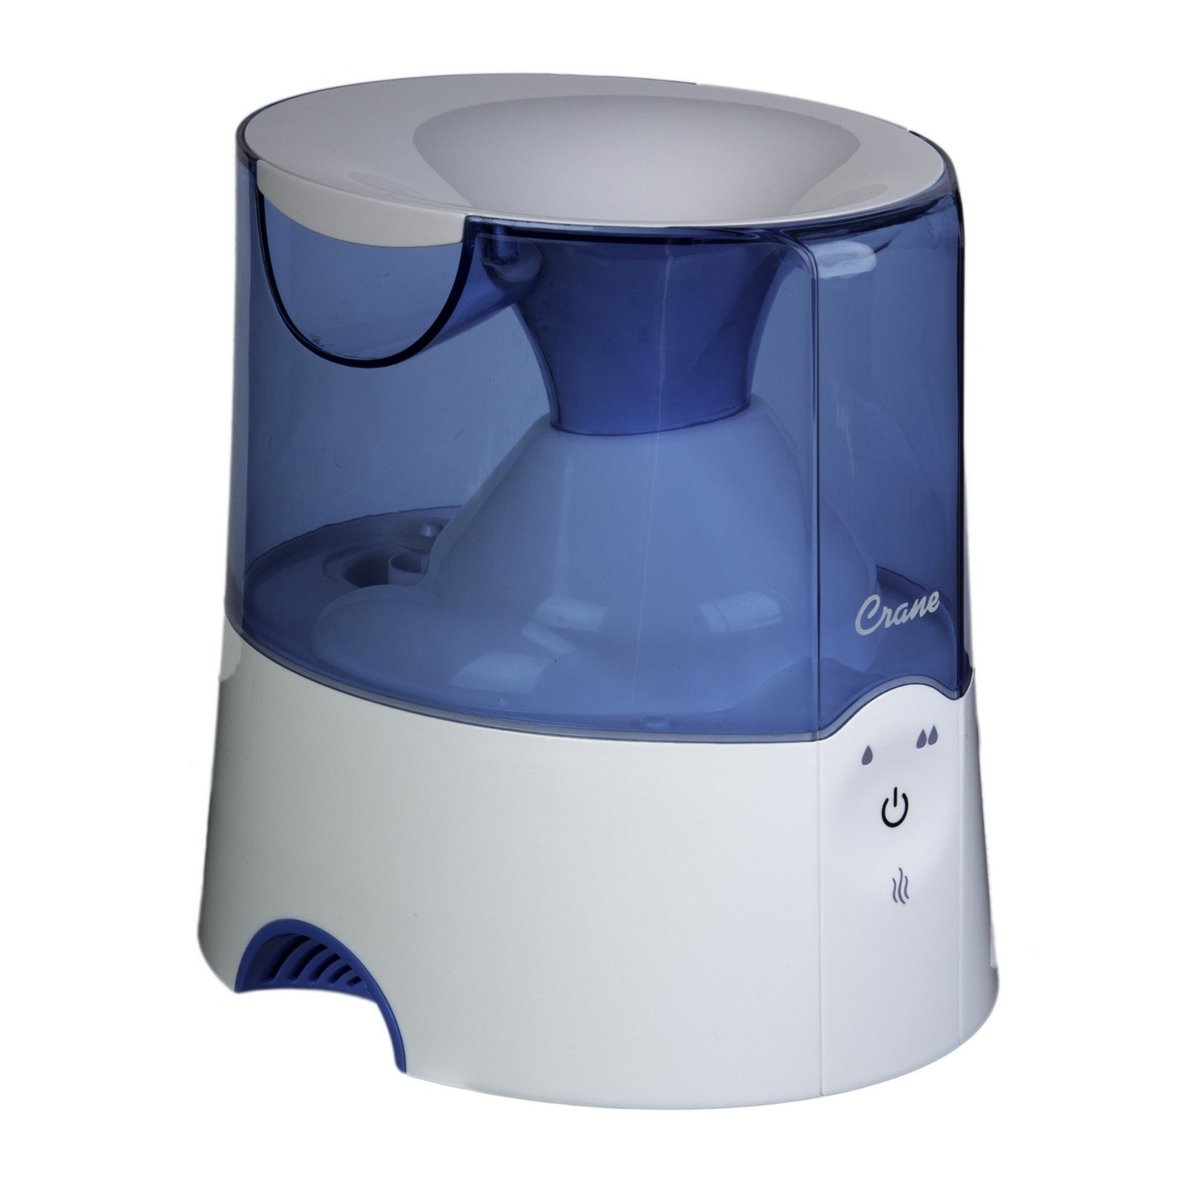 Crane 2-in-1 Humidifier and Steam Inhaler